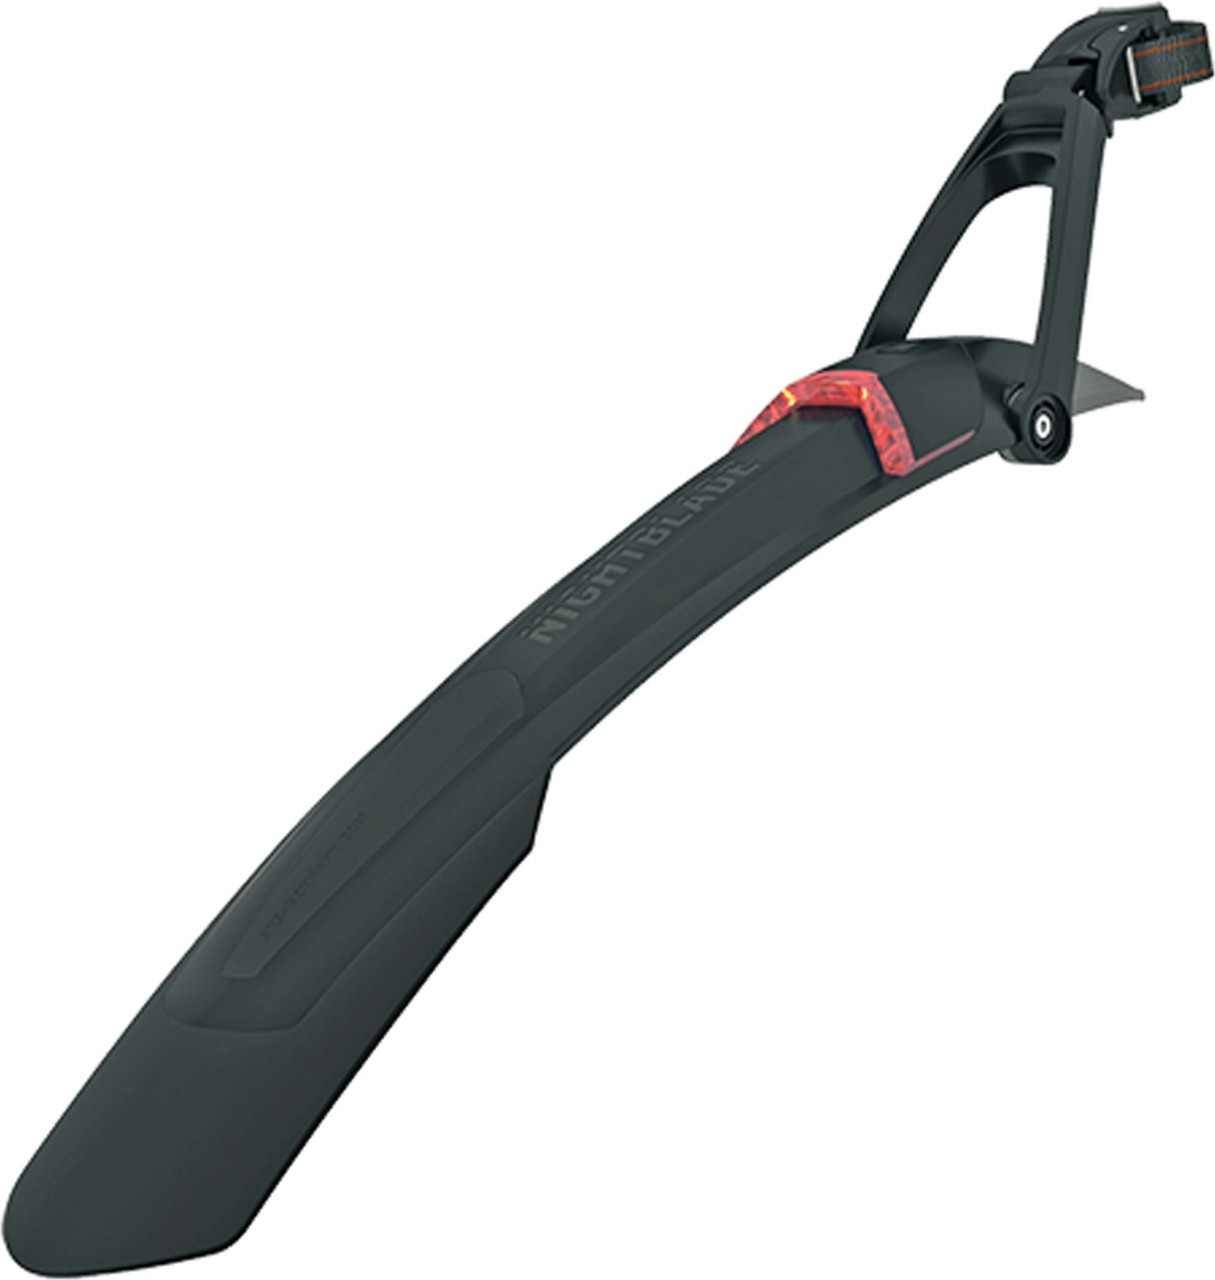 SKS Nightblade 29" - Mudguard with integrated StVZO rear light